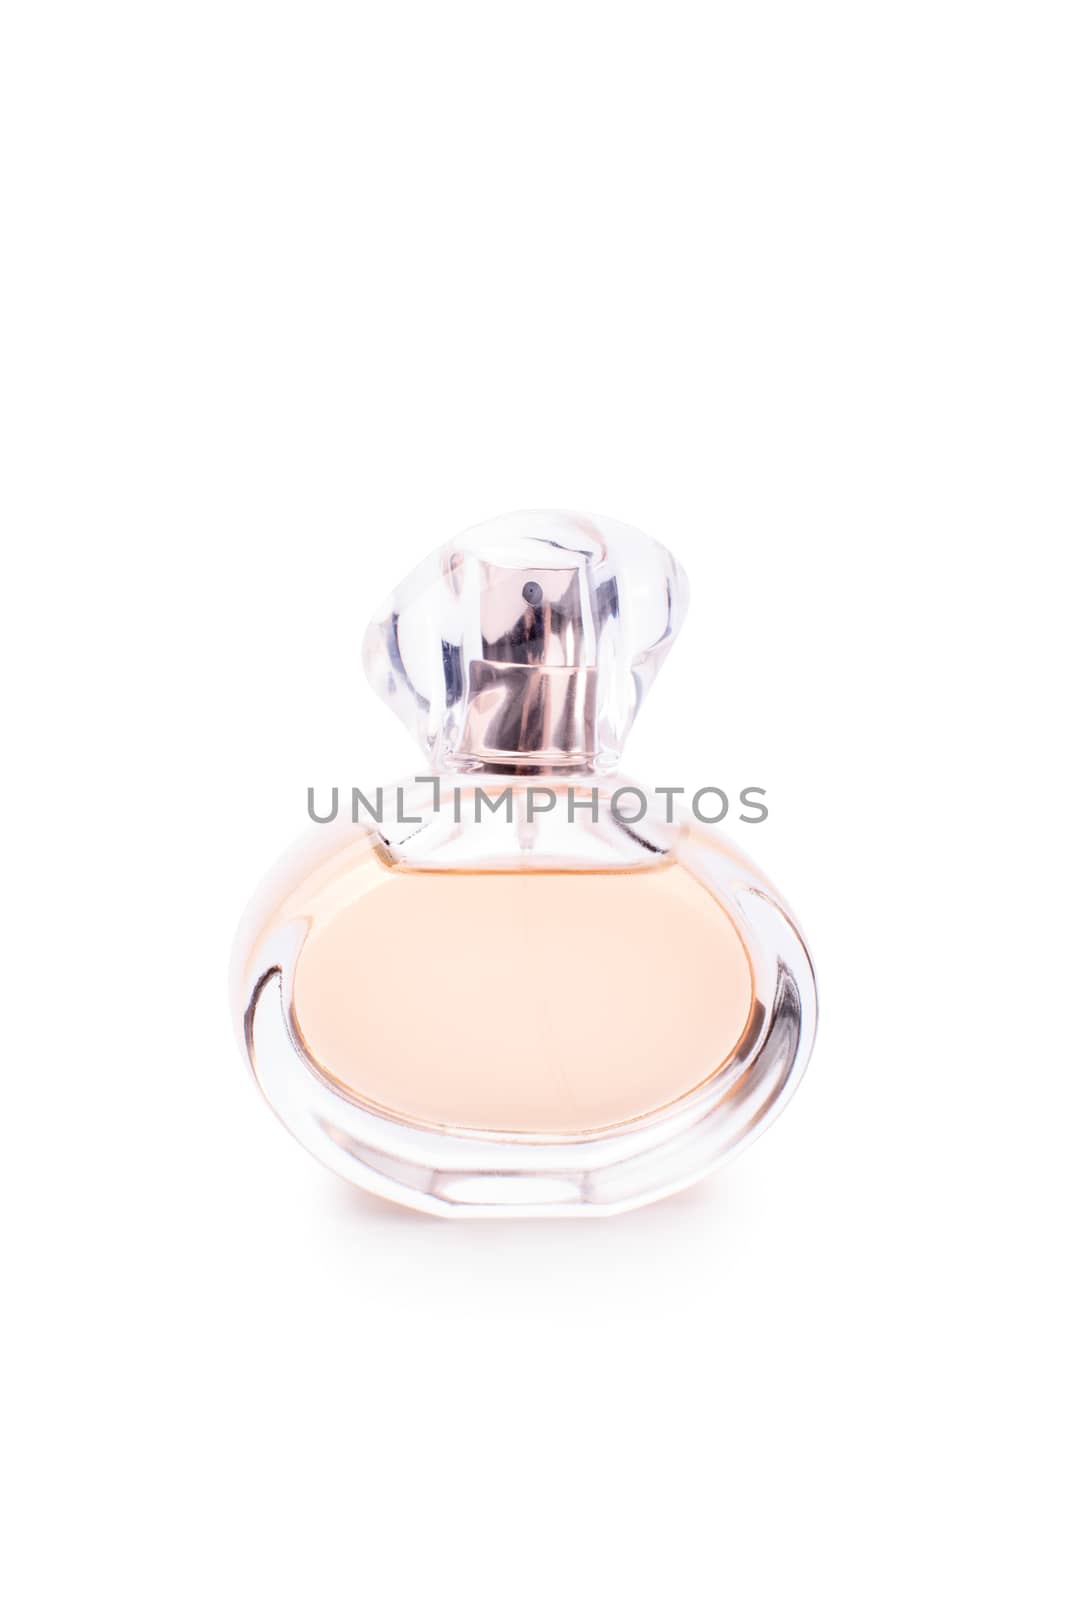 Close up shot of a transparent perfume bottle, isolated on white background.